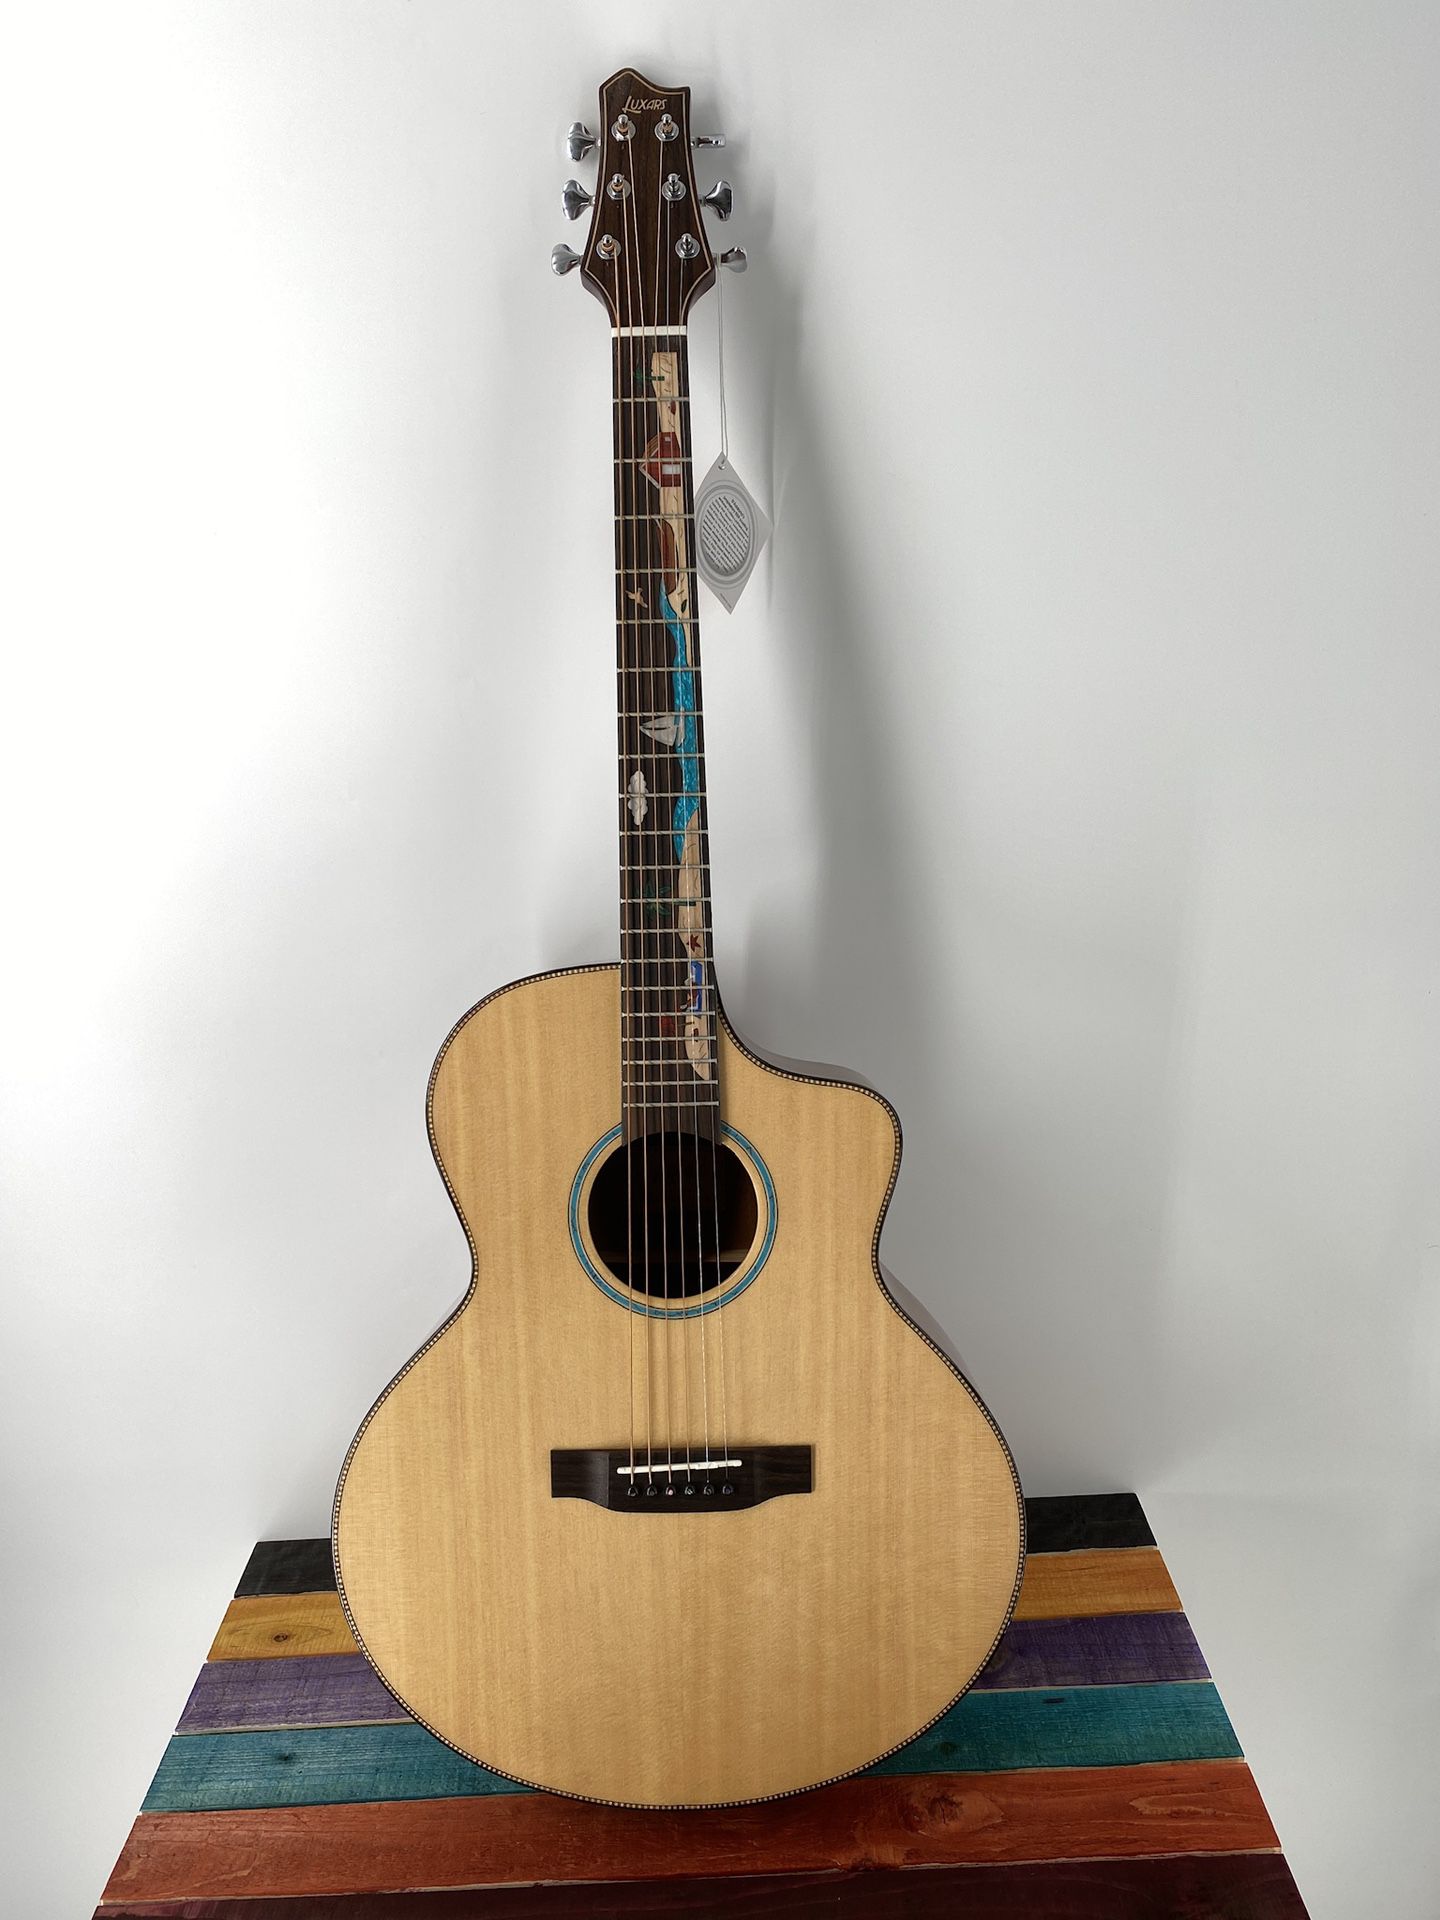 Acoustic Guitar Luxars LX-R1 Acoustic Guitar Cutaway Solid Top Mural Inlay High Quality Killer Price Free Deluxe Gigbag